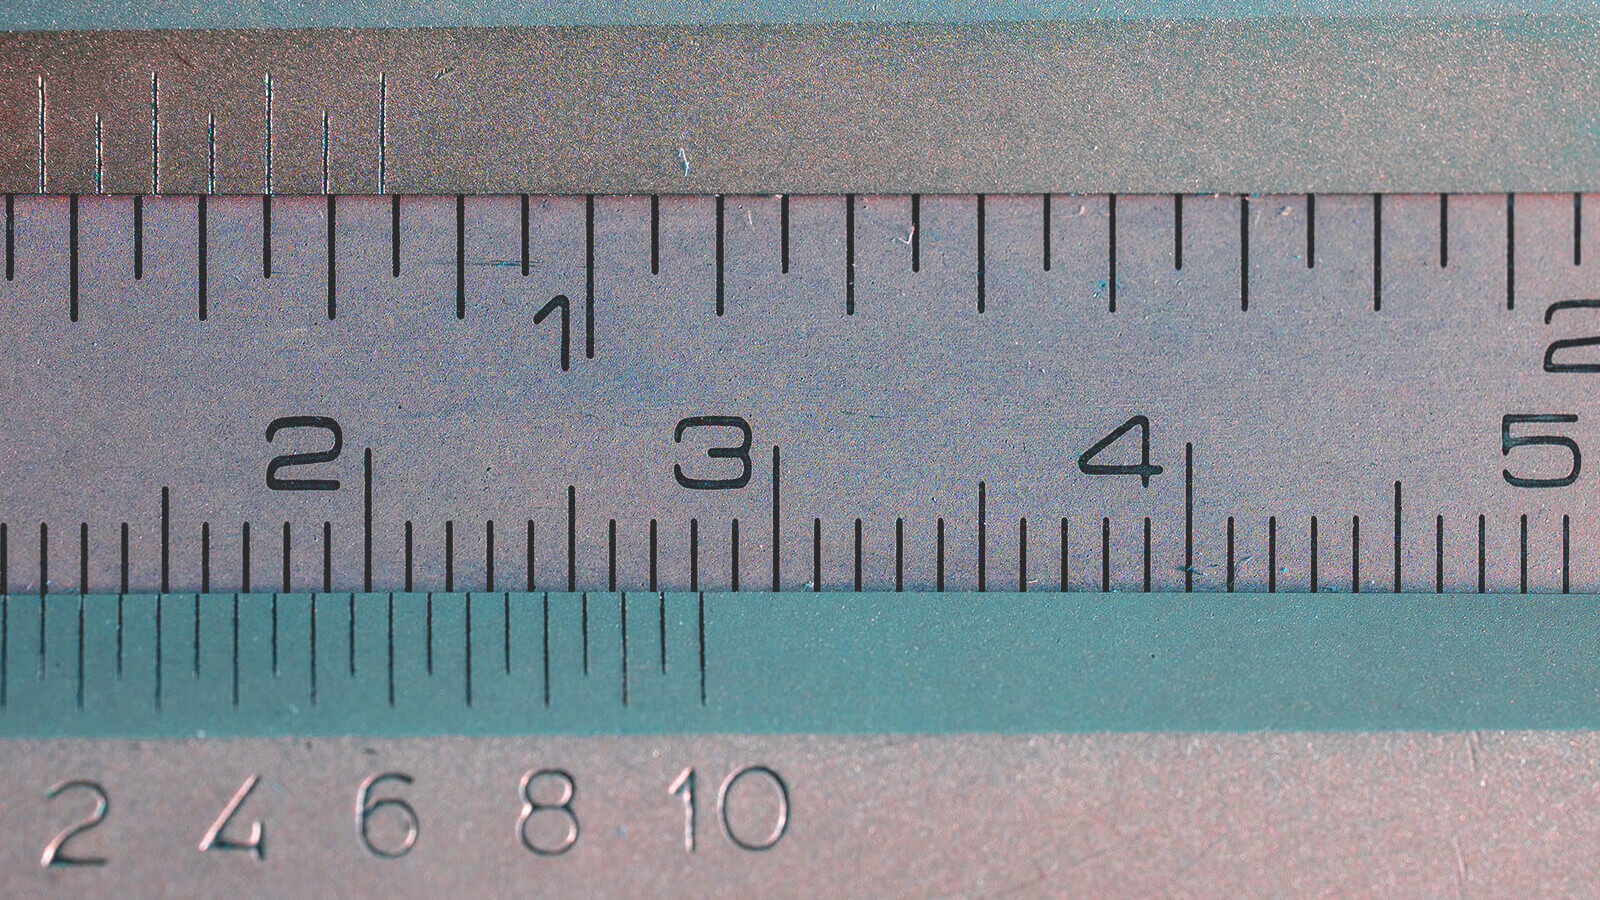 a ruler with increments marked